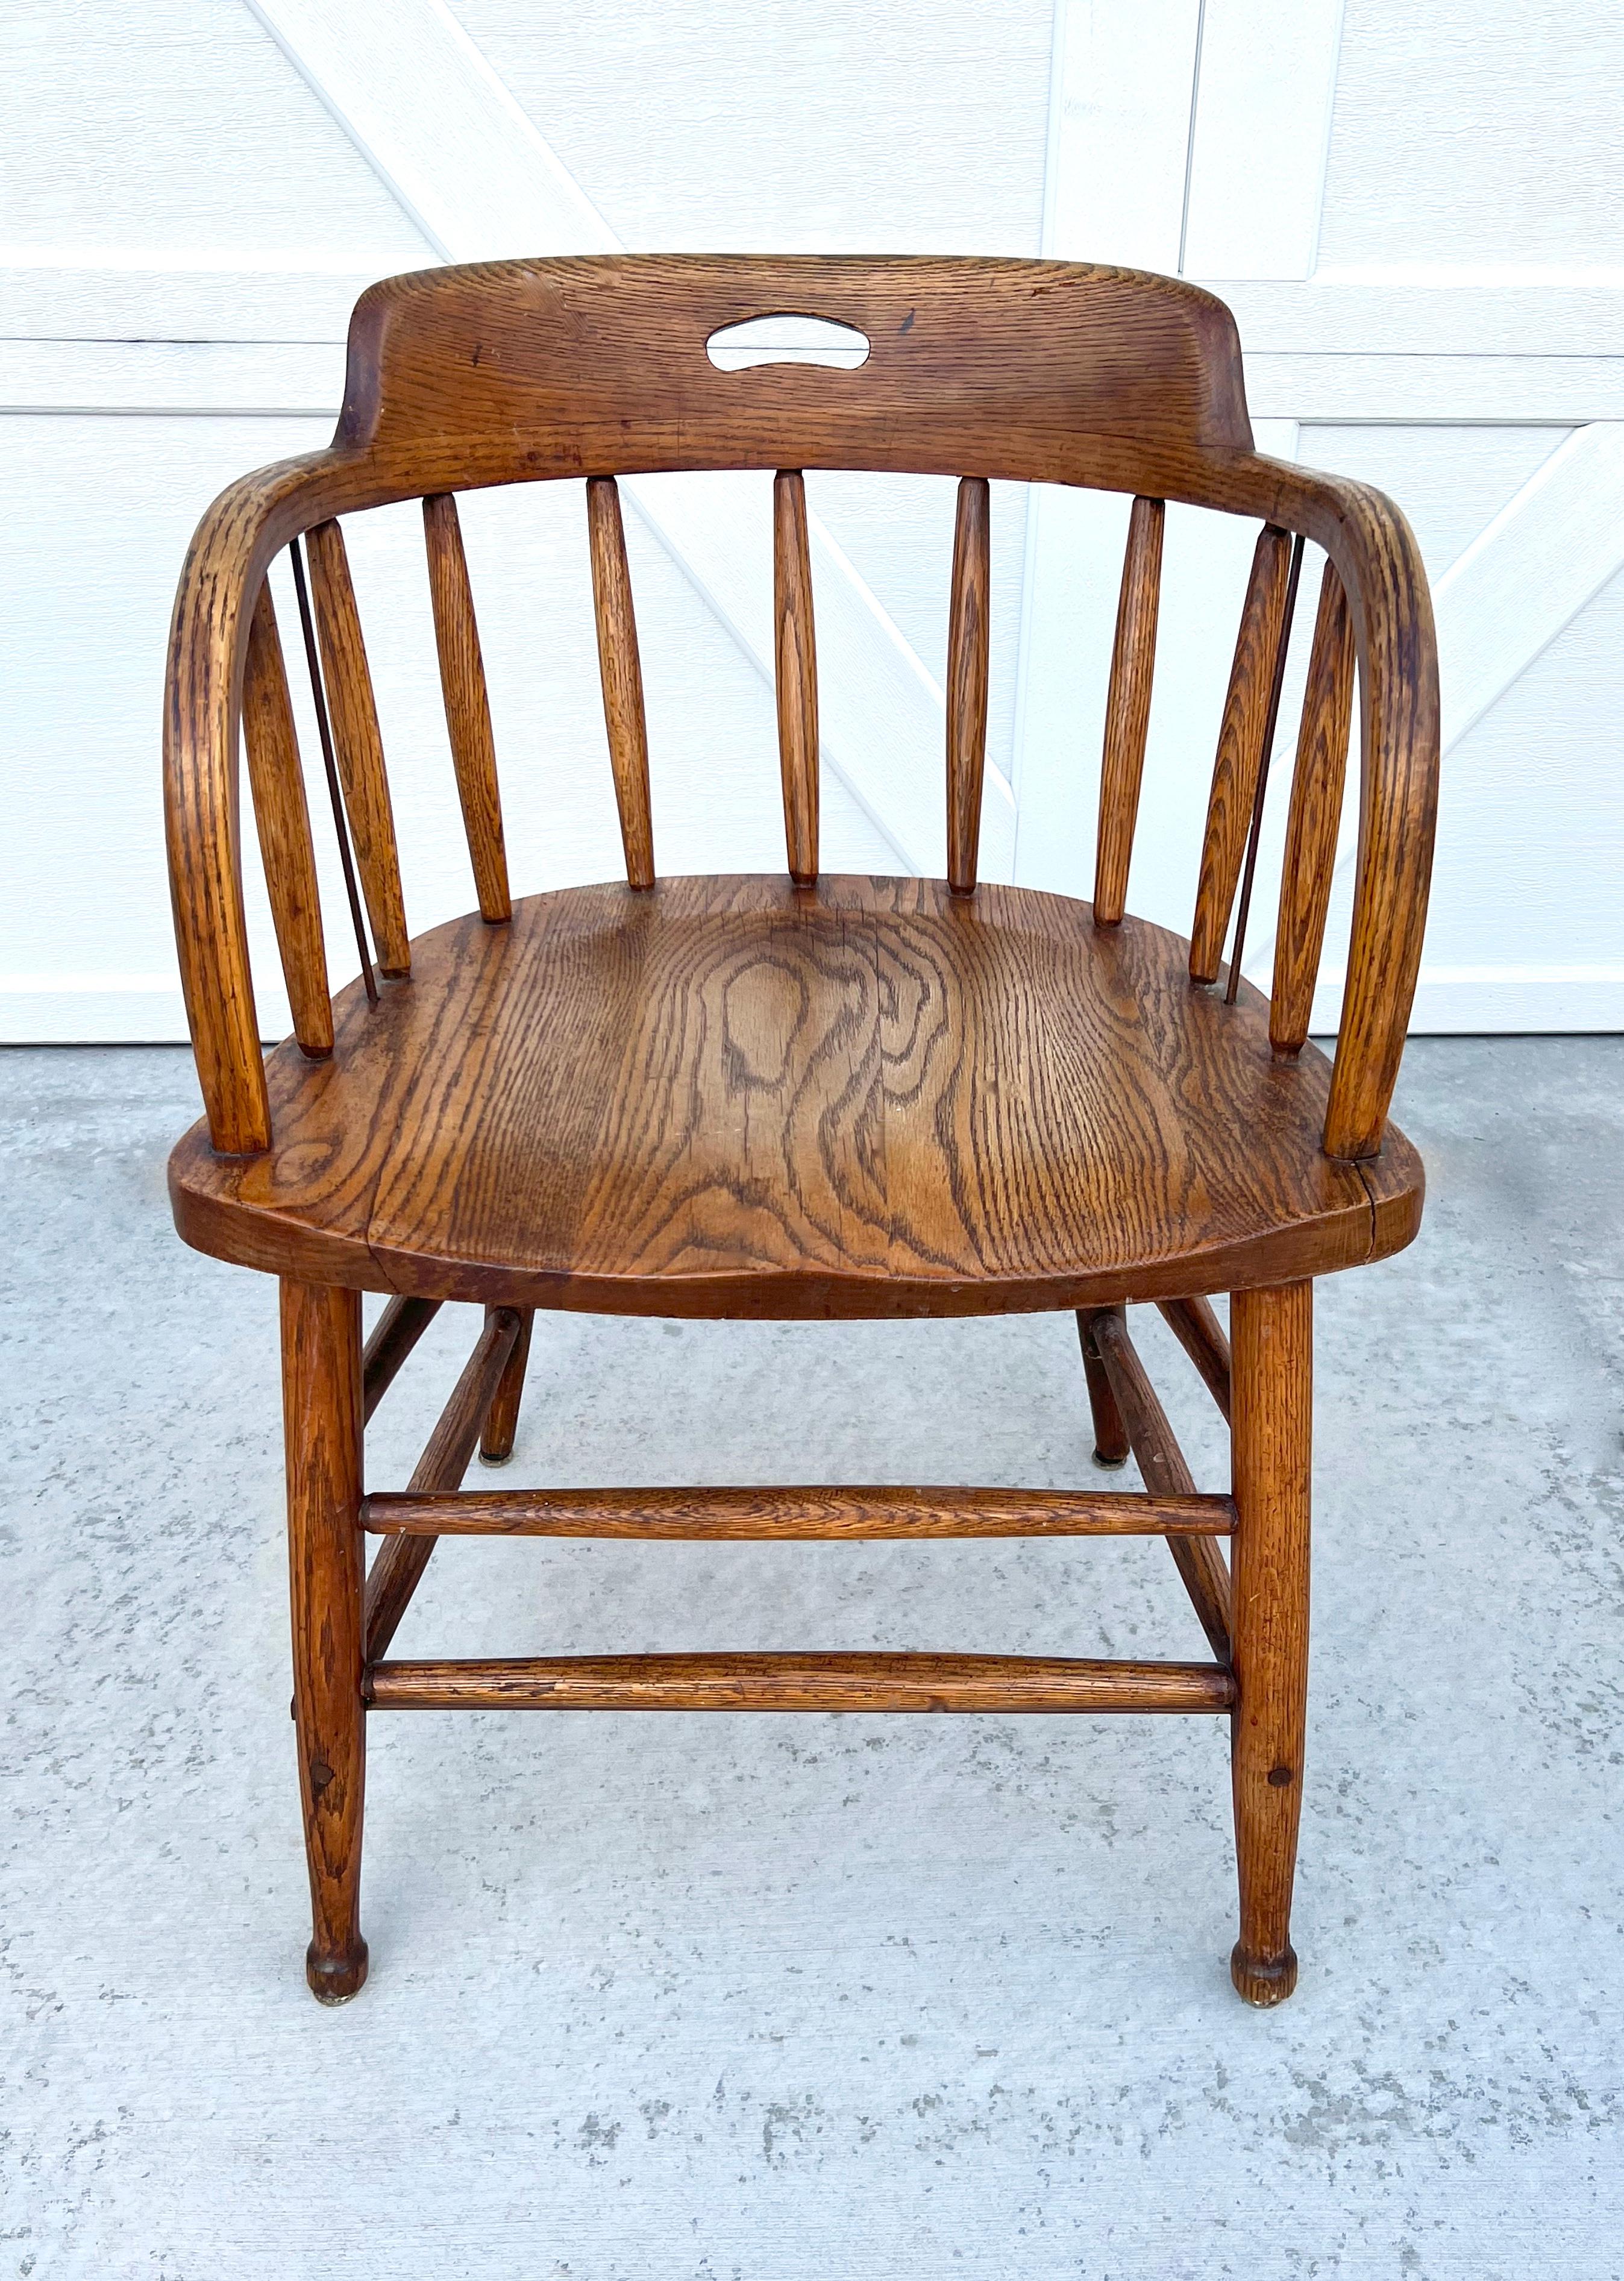 American Early 20th Century Antique Mismatched Barrel Back Oak Wood Pub Captain's Chairs